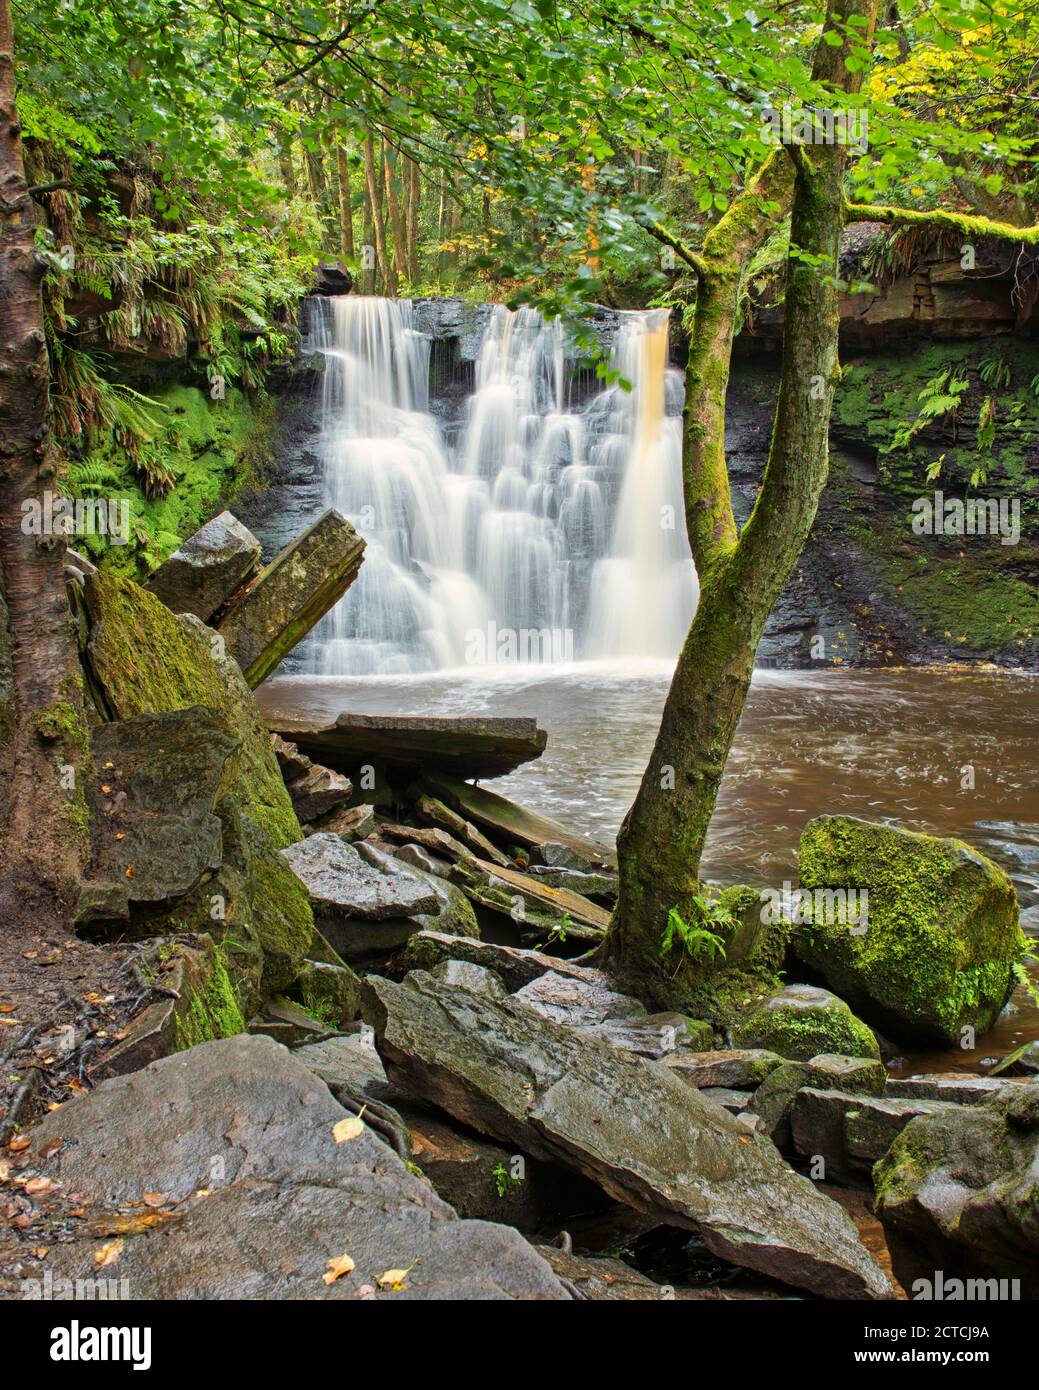 Goit Stock waterfall, revealed behind a surrounding tree, captured in portrait format Stock Photo